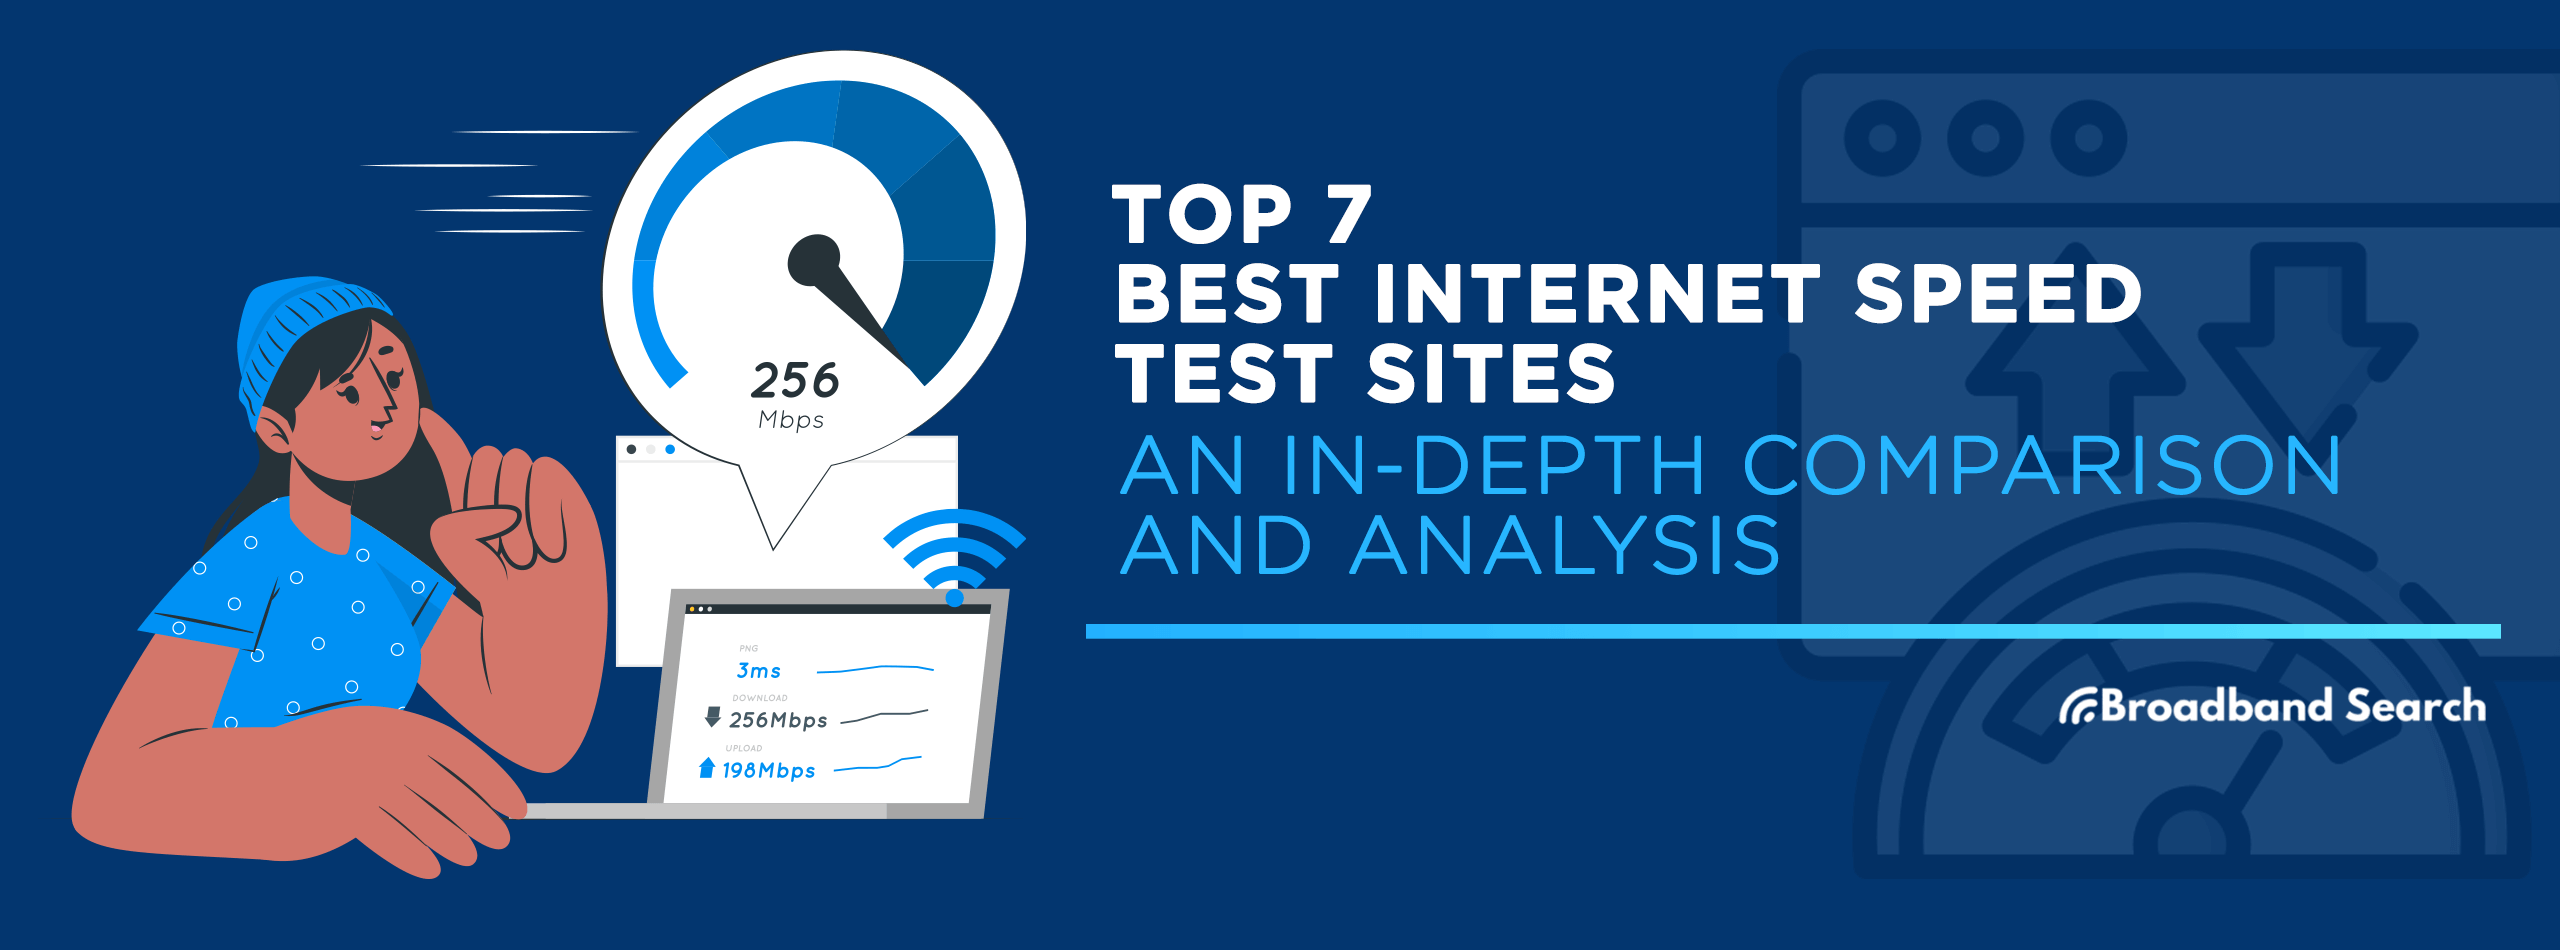 Top 7 Best Internet Speed Test Sites: An In-Depth Comparison and Analysis